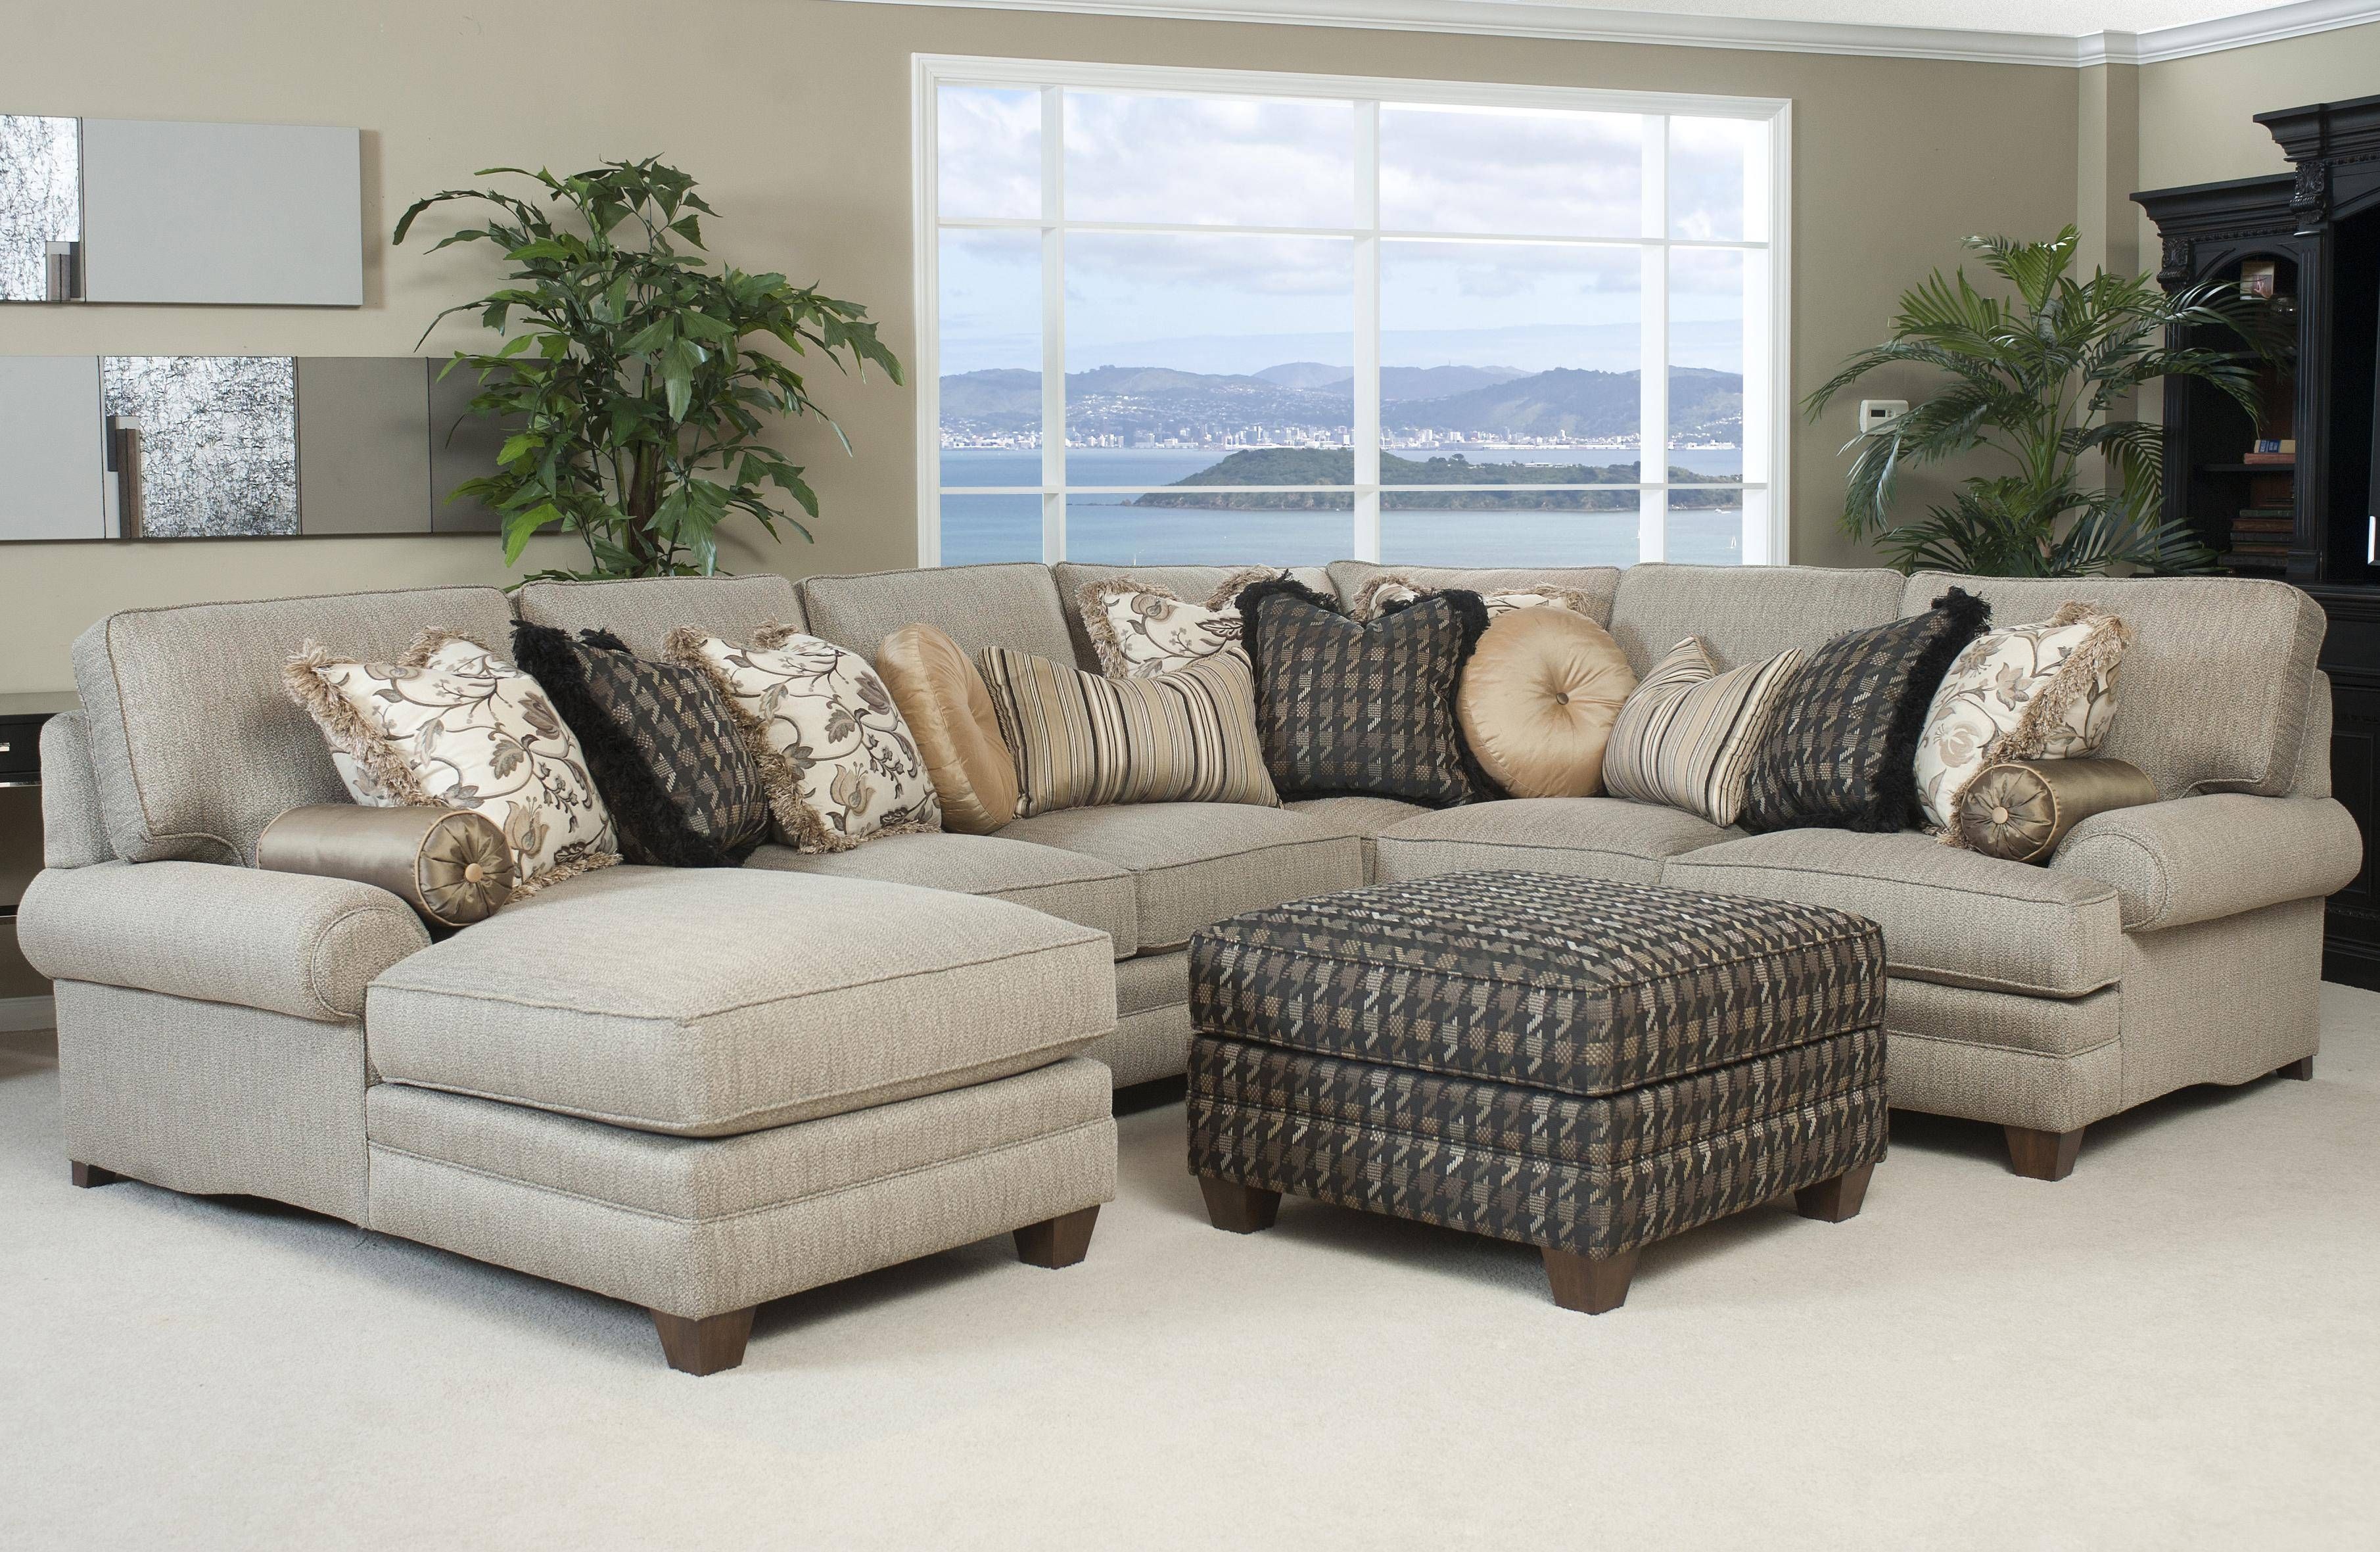 Unique Sectional Sofas | Homesfeed Pertaining To Sectinal Sofas (View 12 of 30)